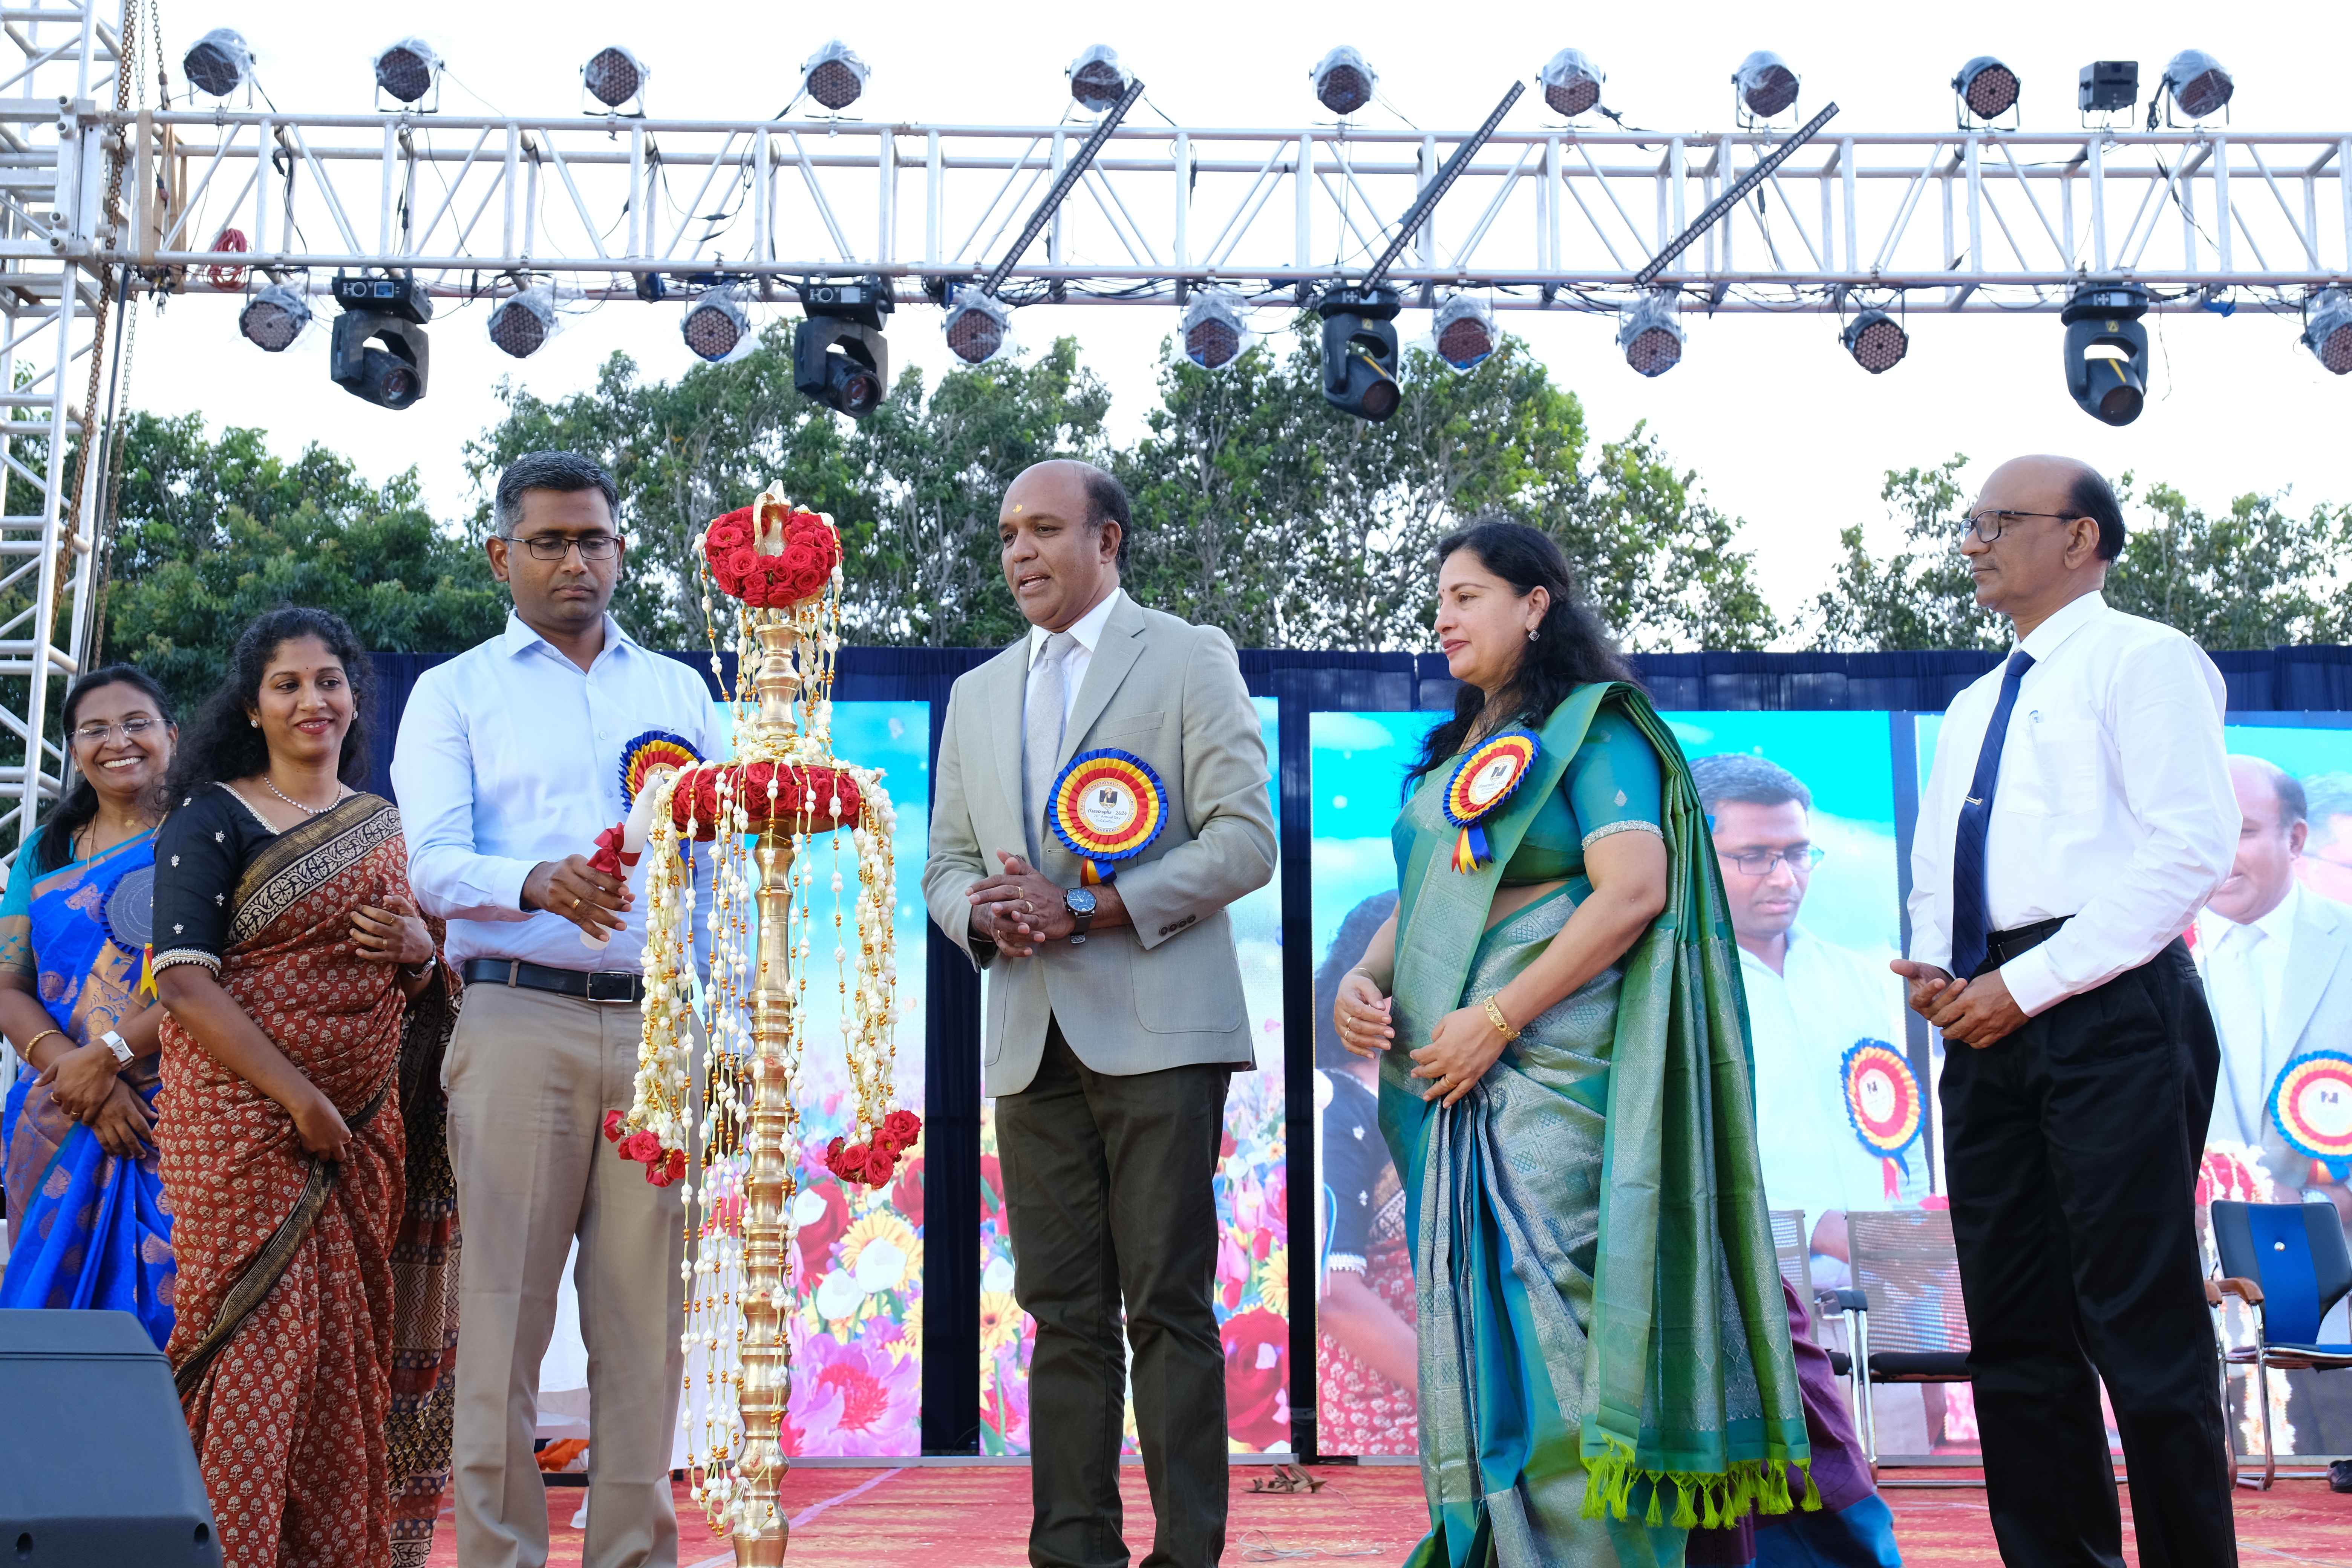 20th ANNUAL DAY